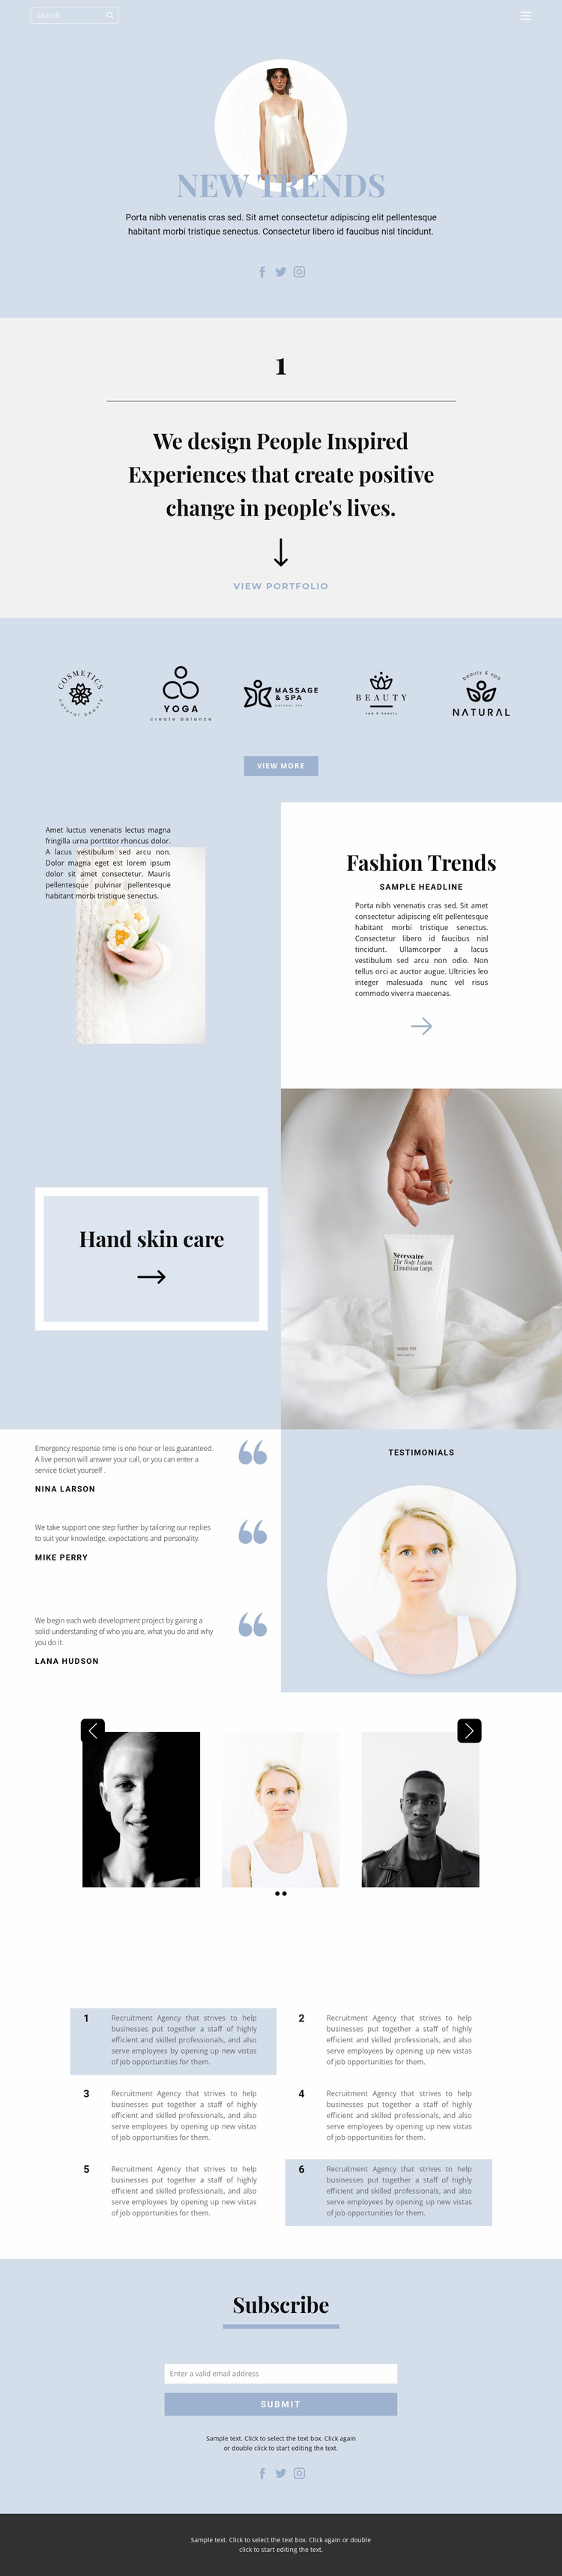 Setting trends Website Template